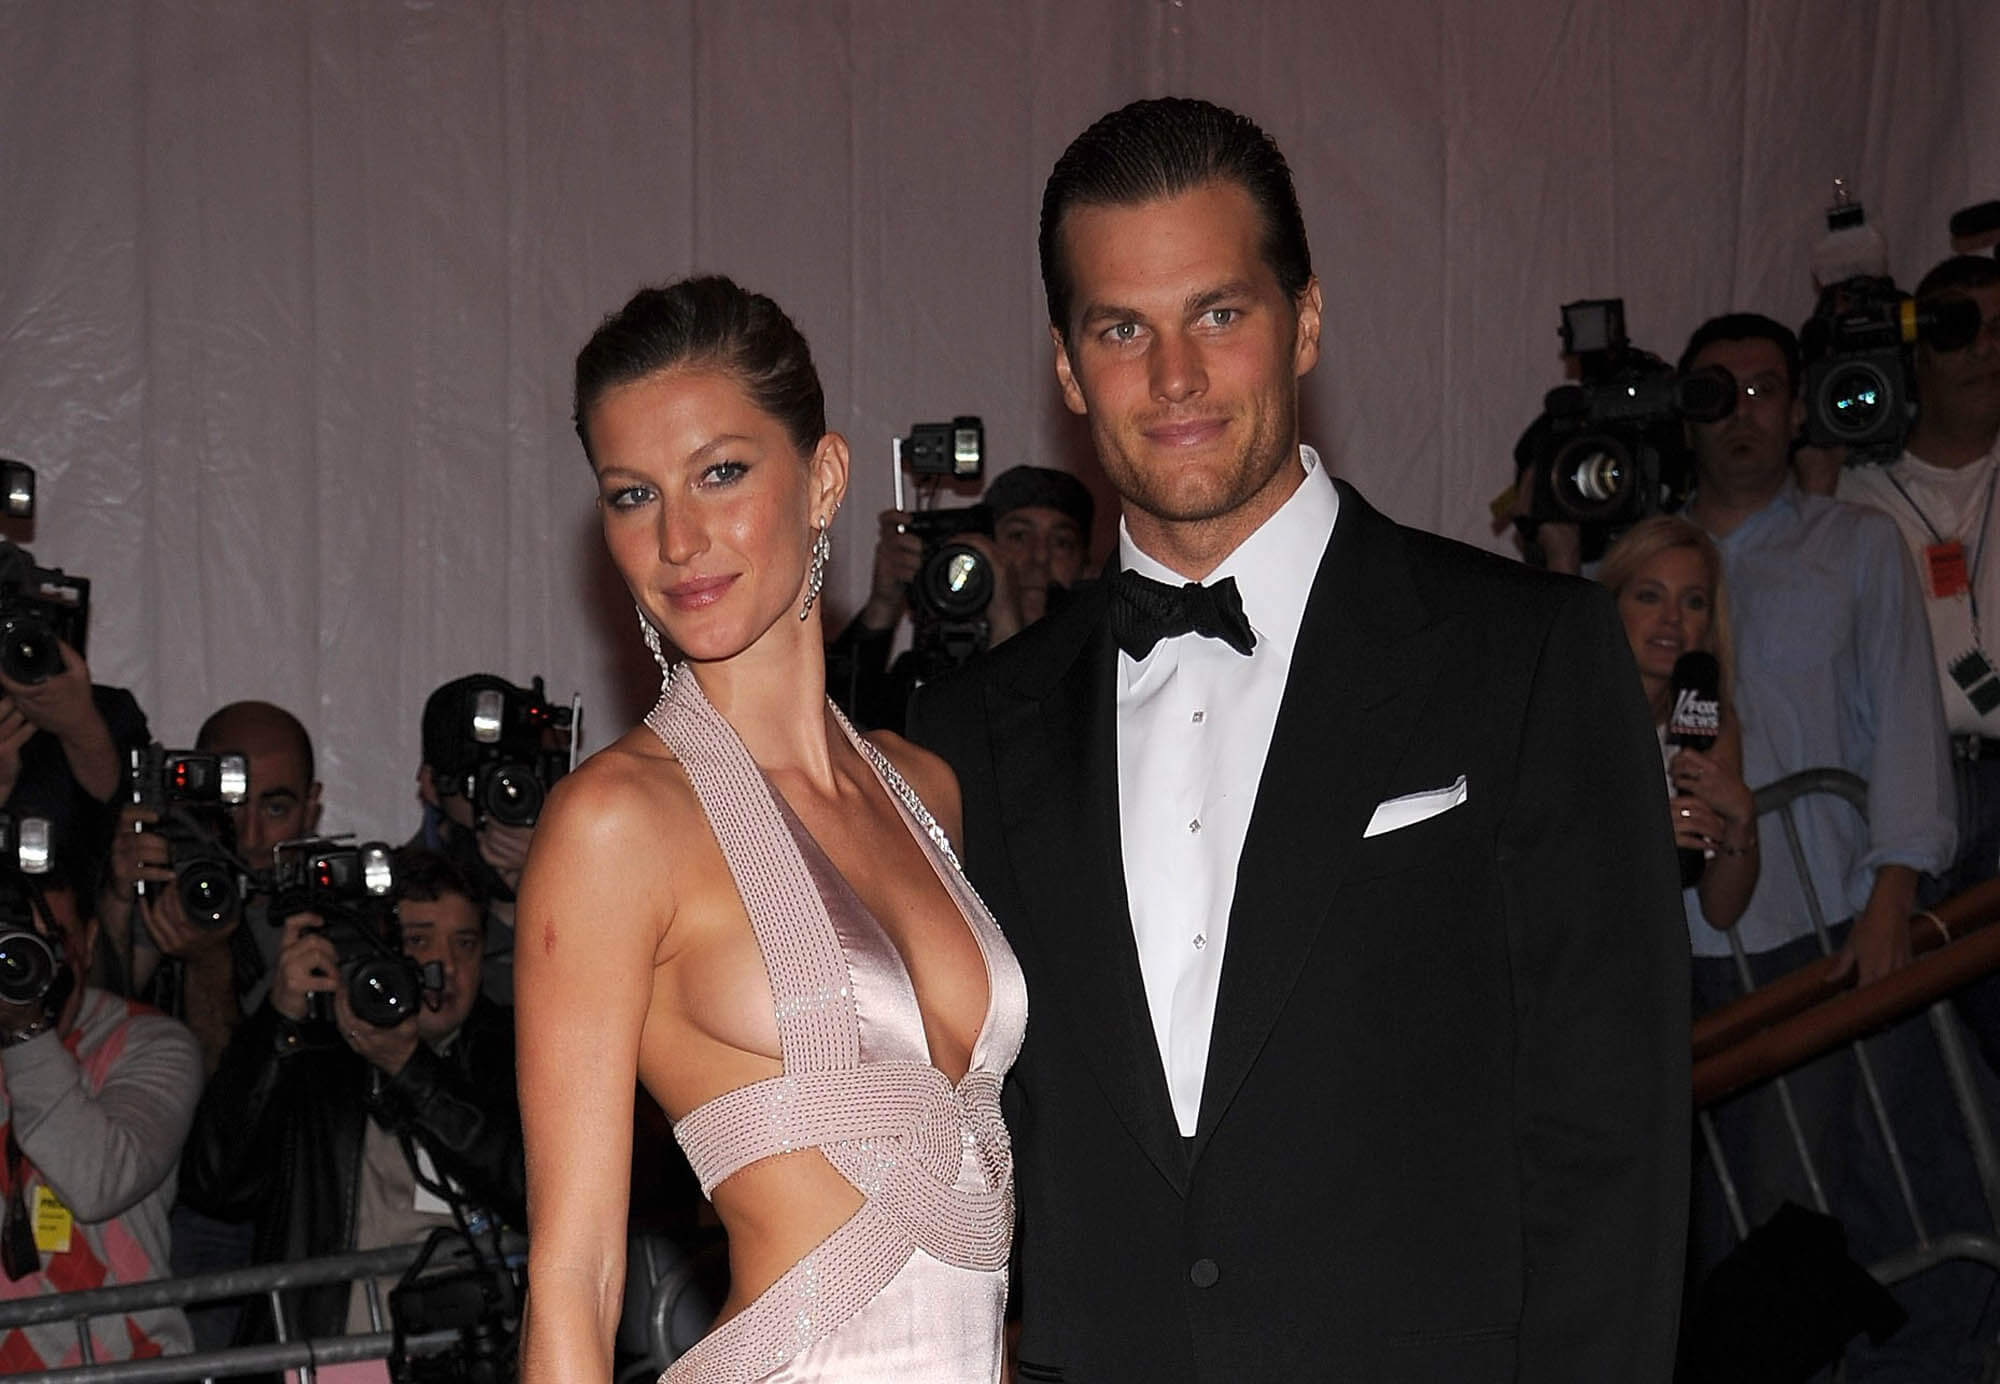 Gisele Bundchen will be a Met Gala single for the first time in years